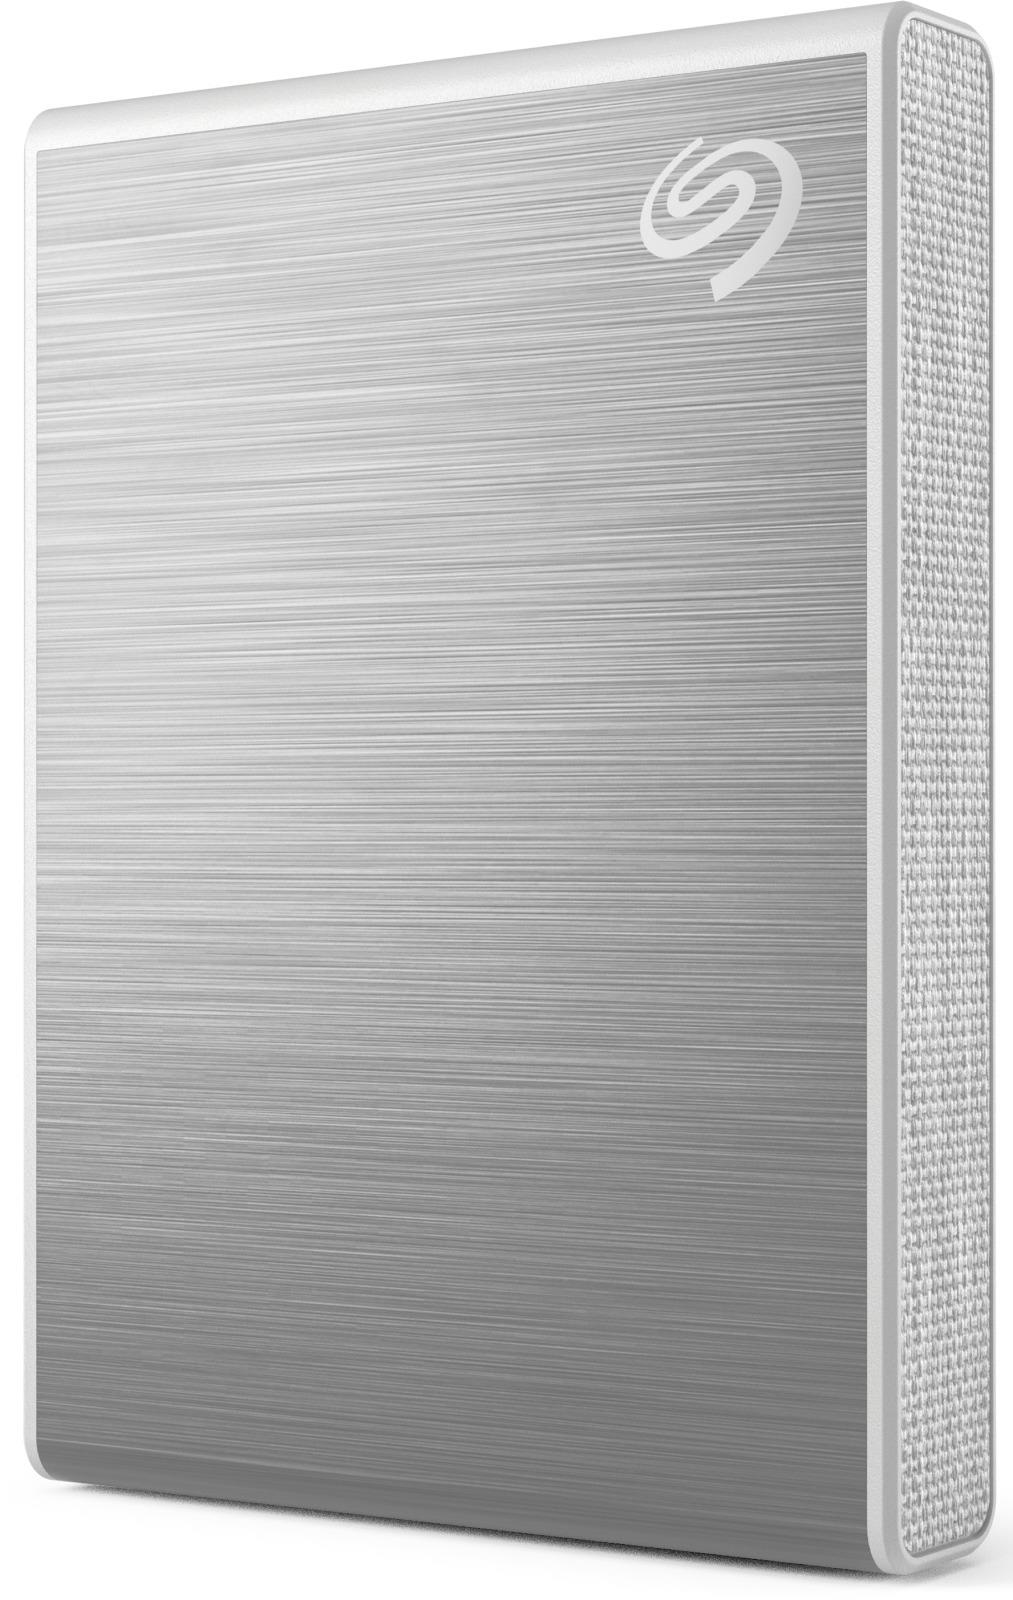 2TB Seagate One Touch Portable SSD Silver